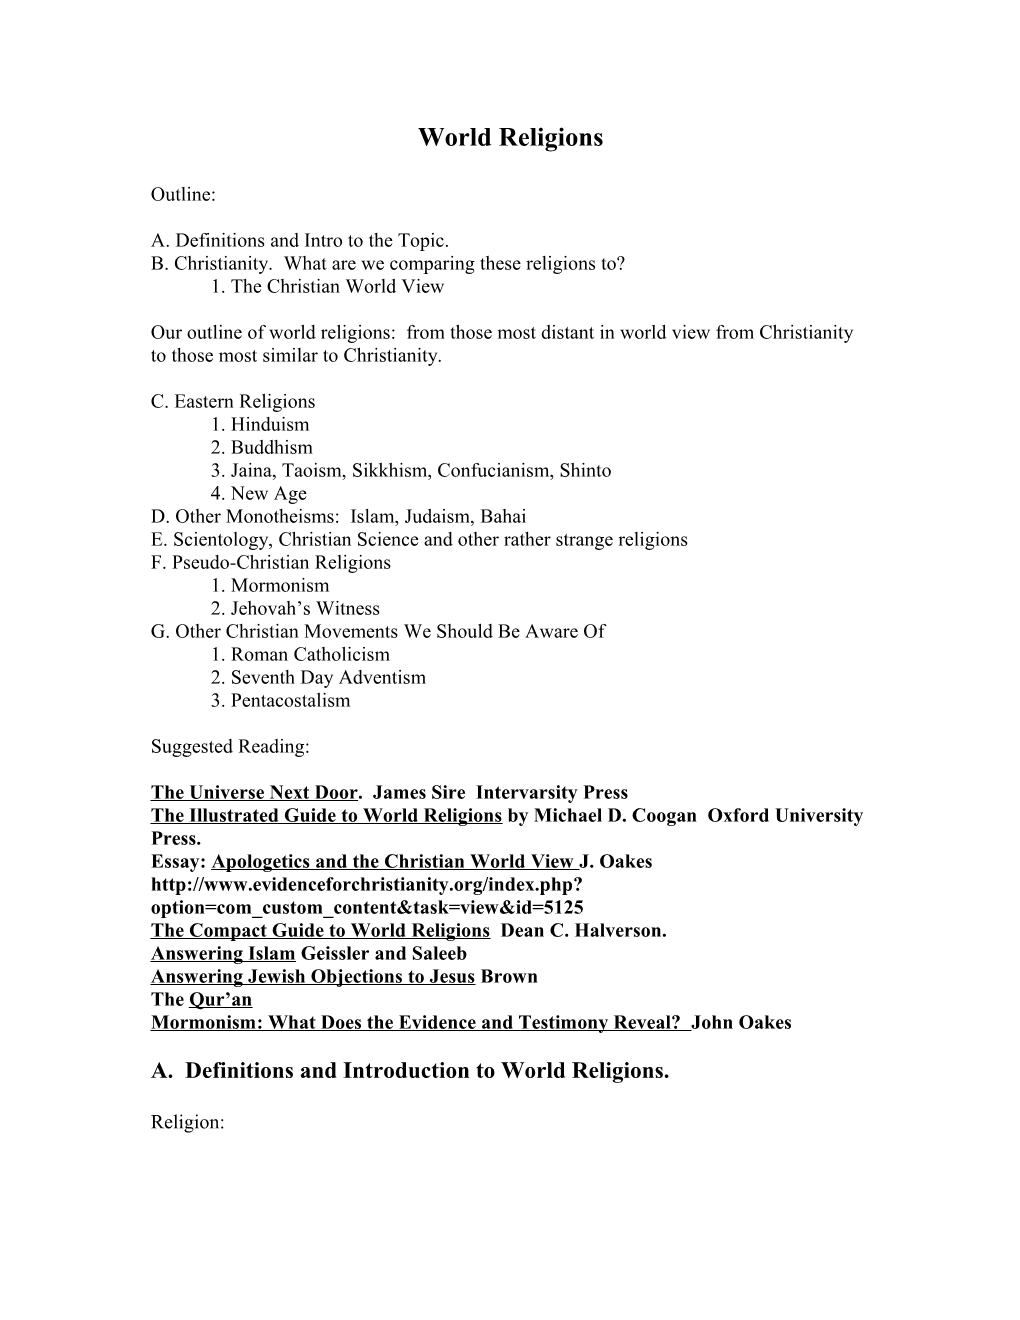 Christian Apologetics and World Religions